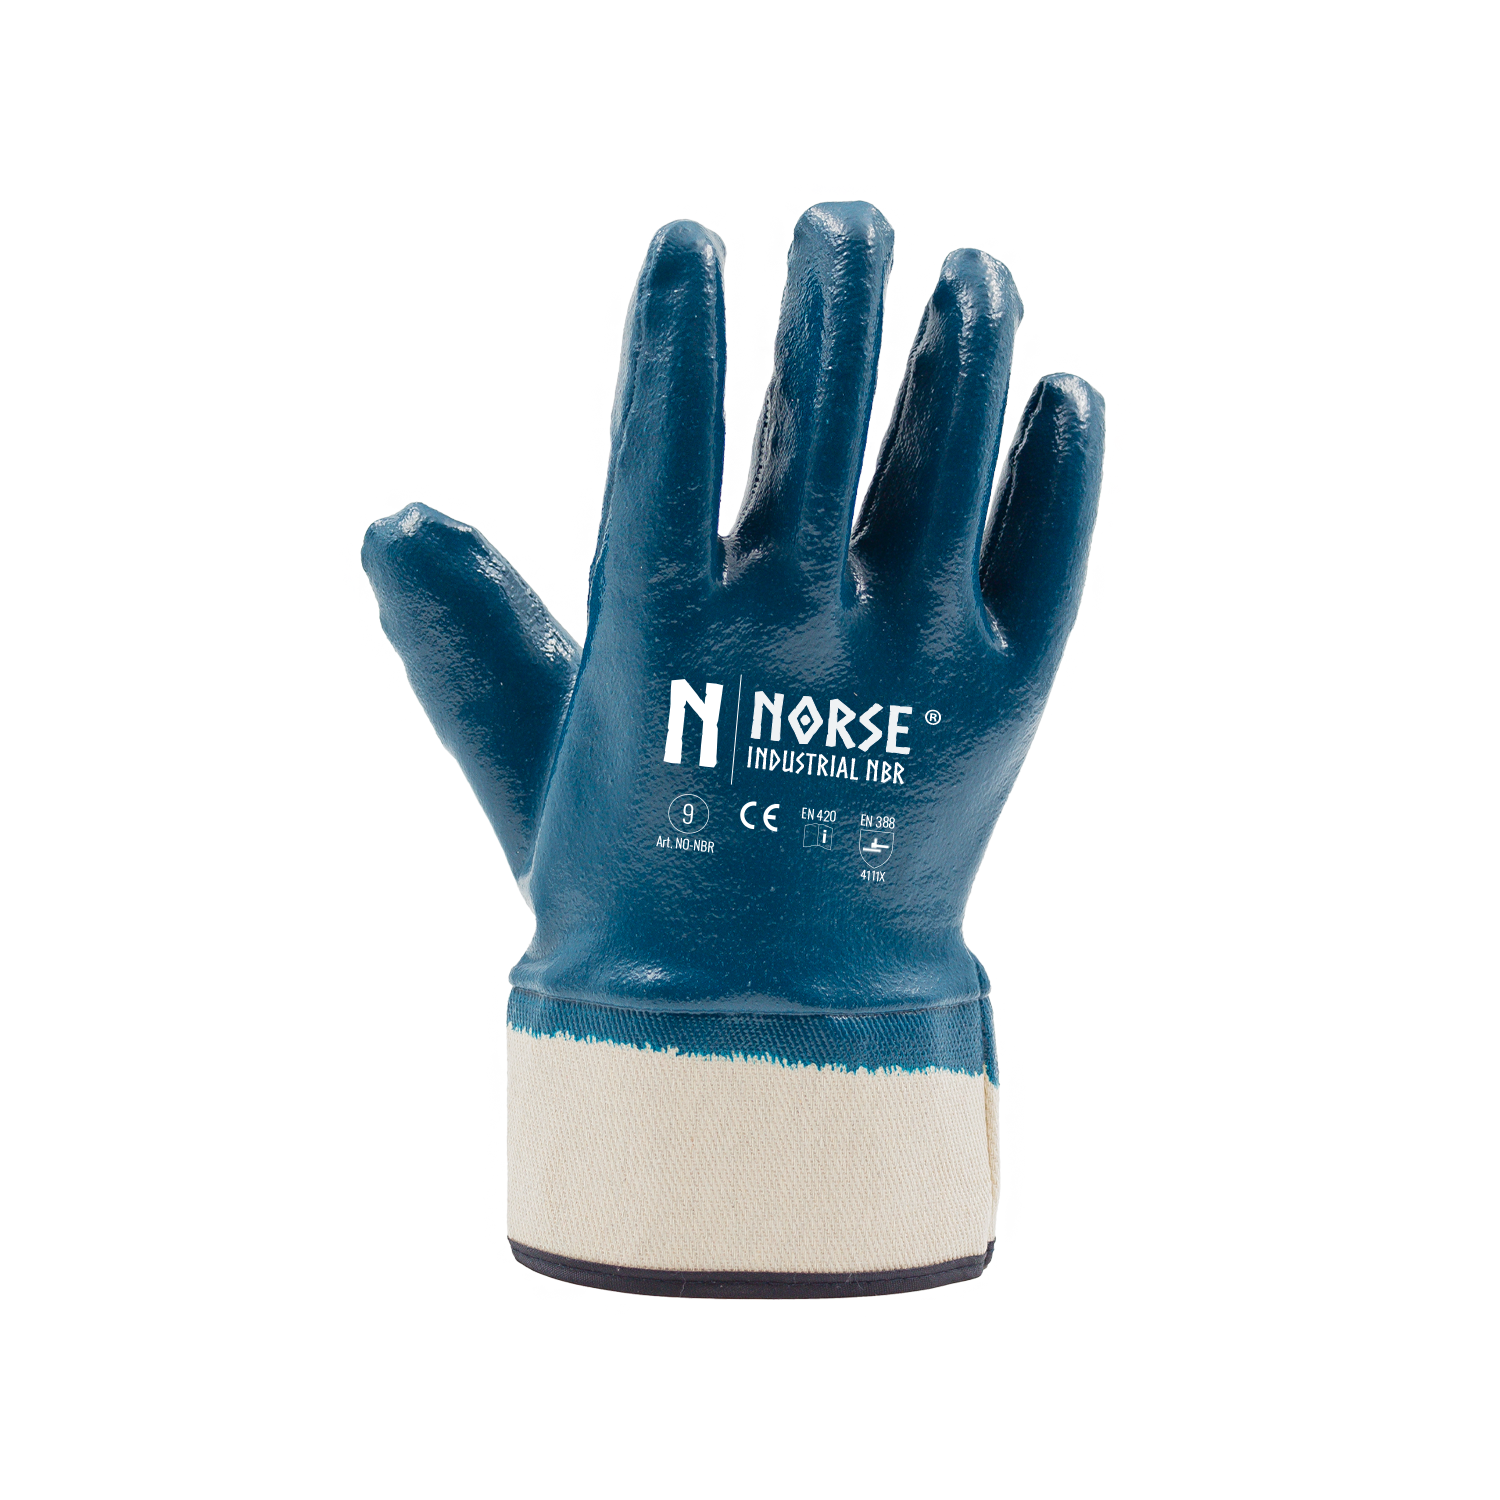 NORSE Industrial NBR Durable gloves size 11